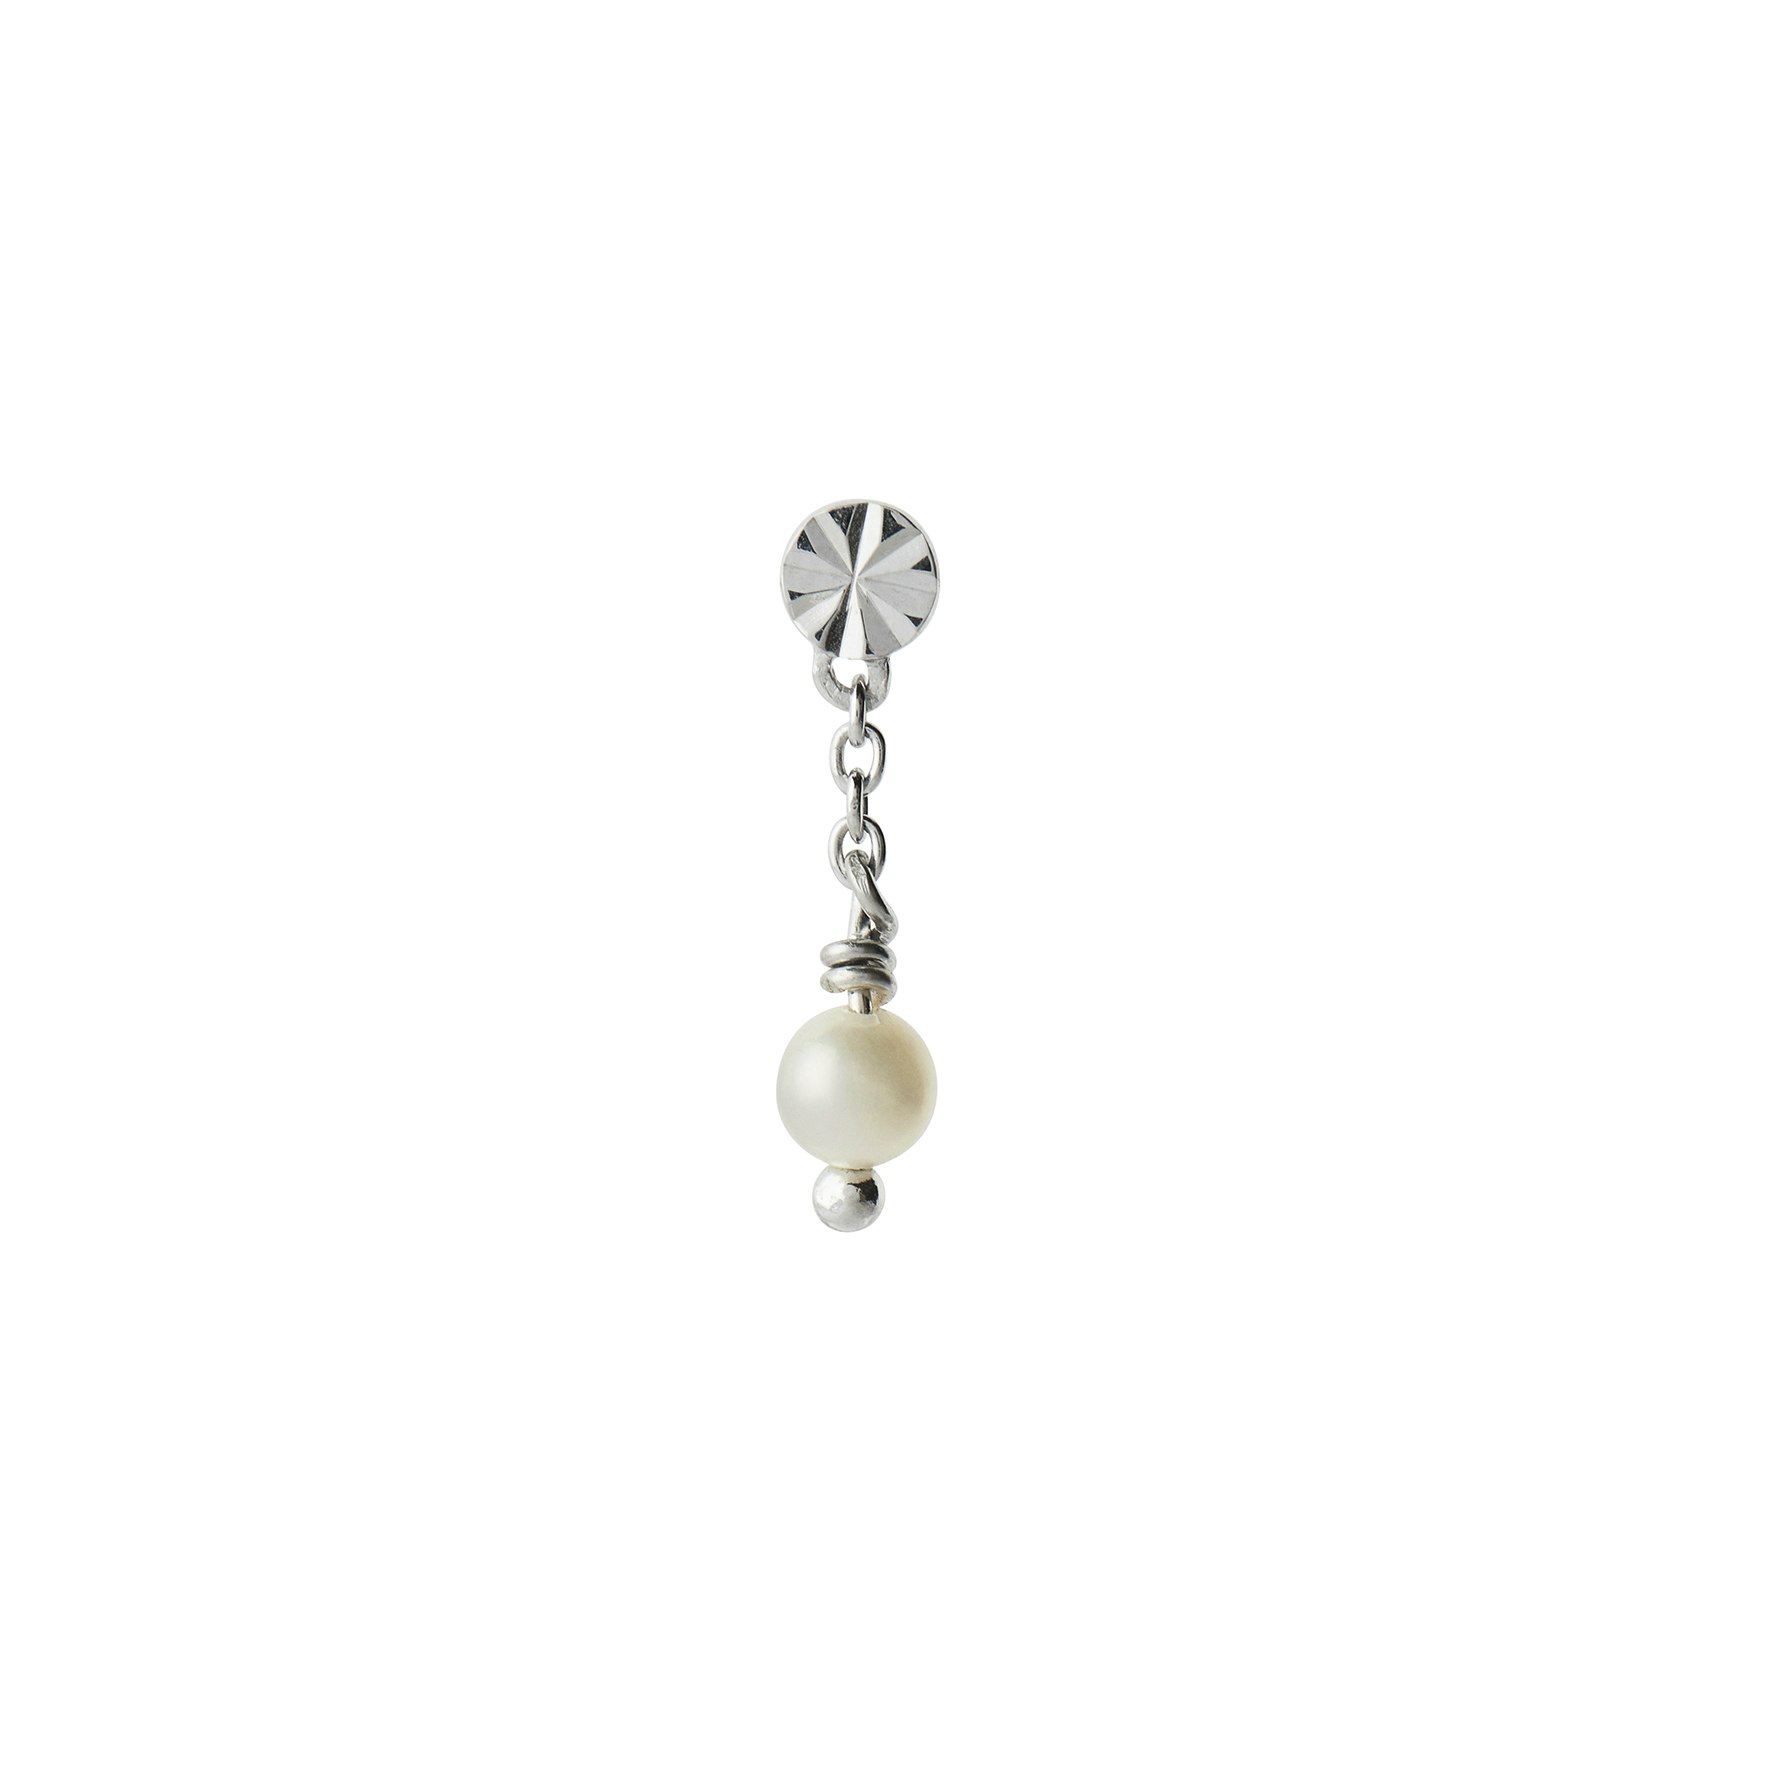 Tres Petit Etoile Earring With Pearl fra STINE A Jewelry i Sølv Sterling 925